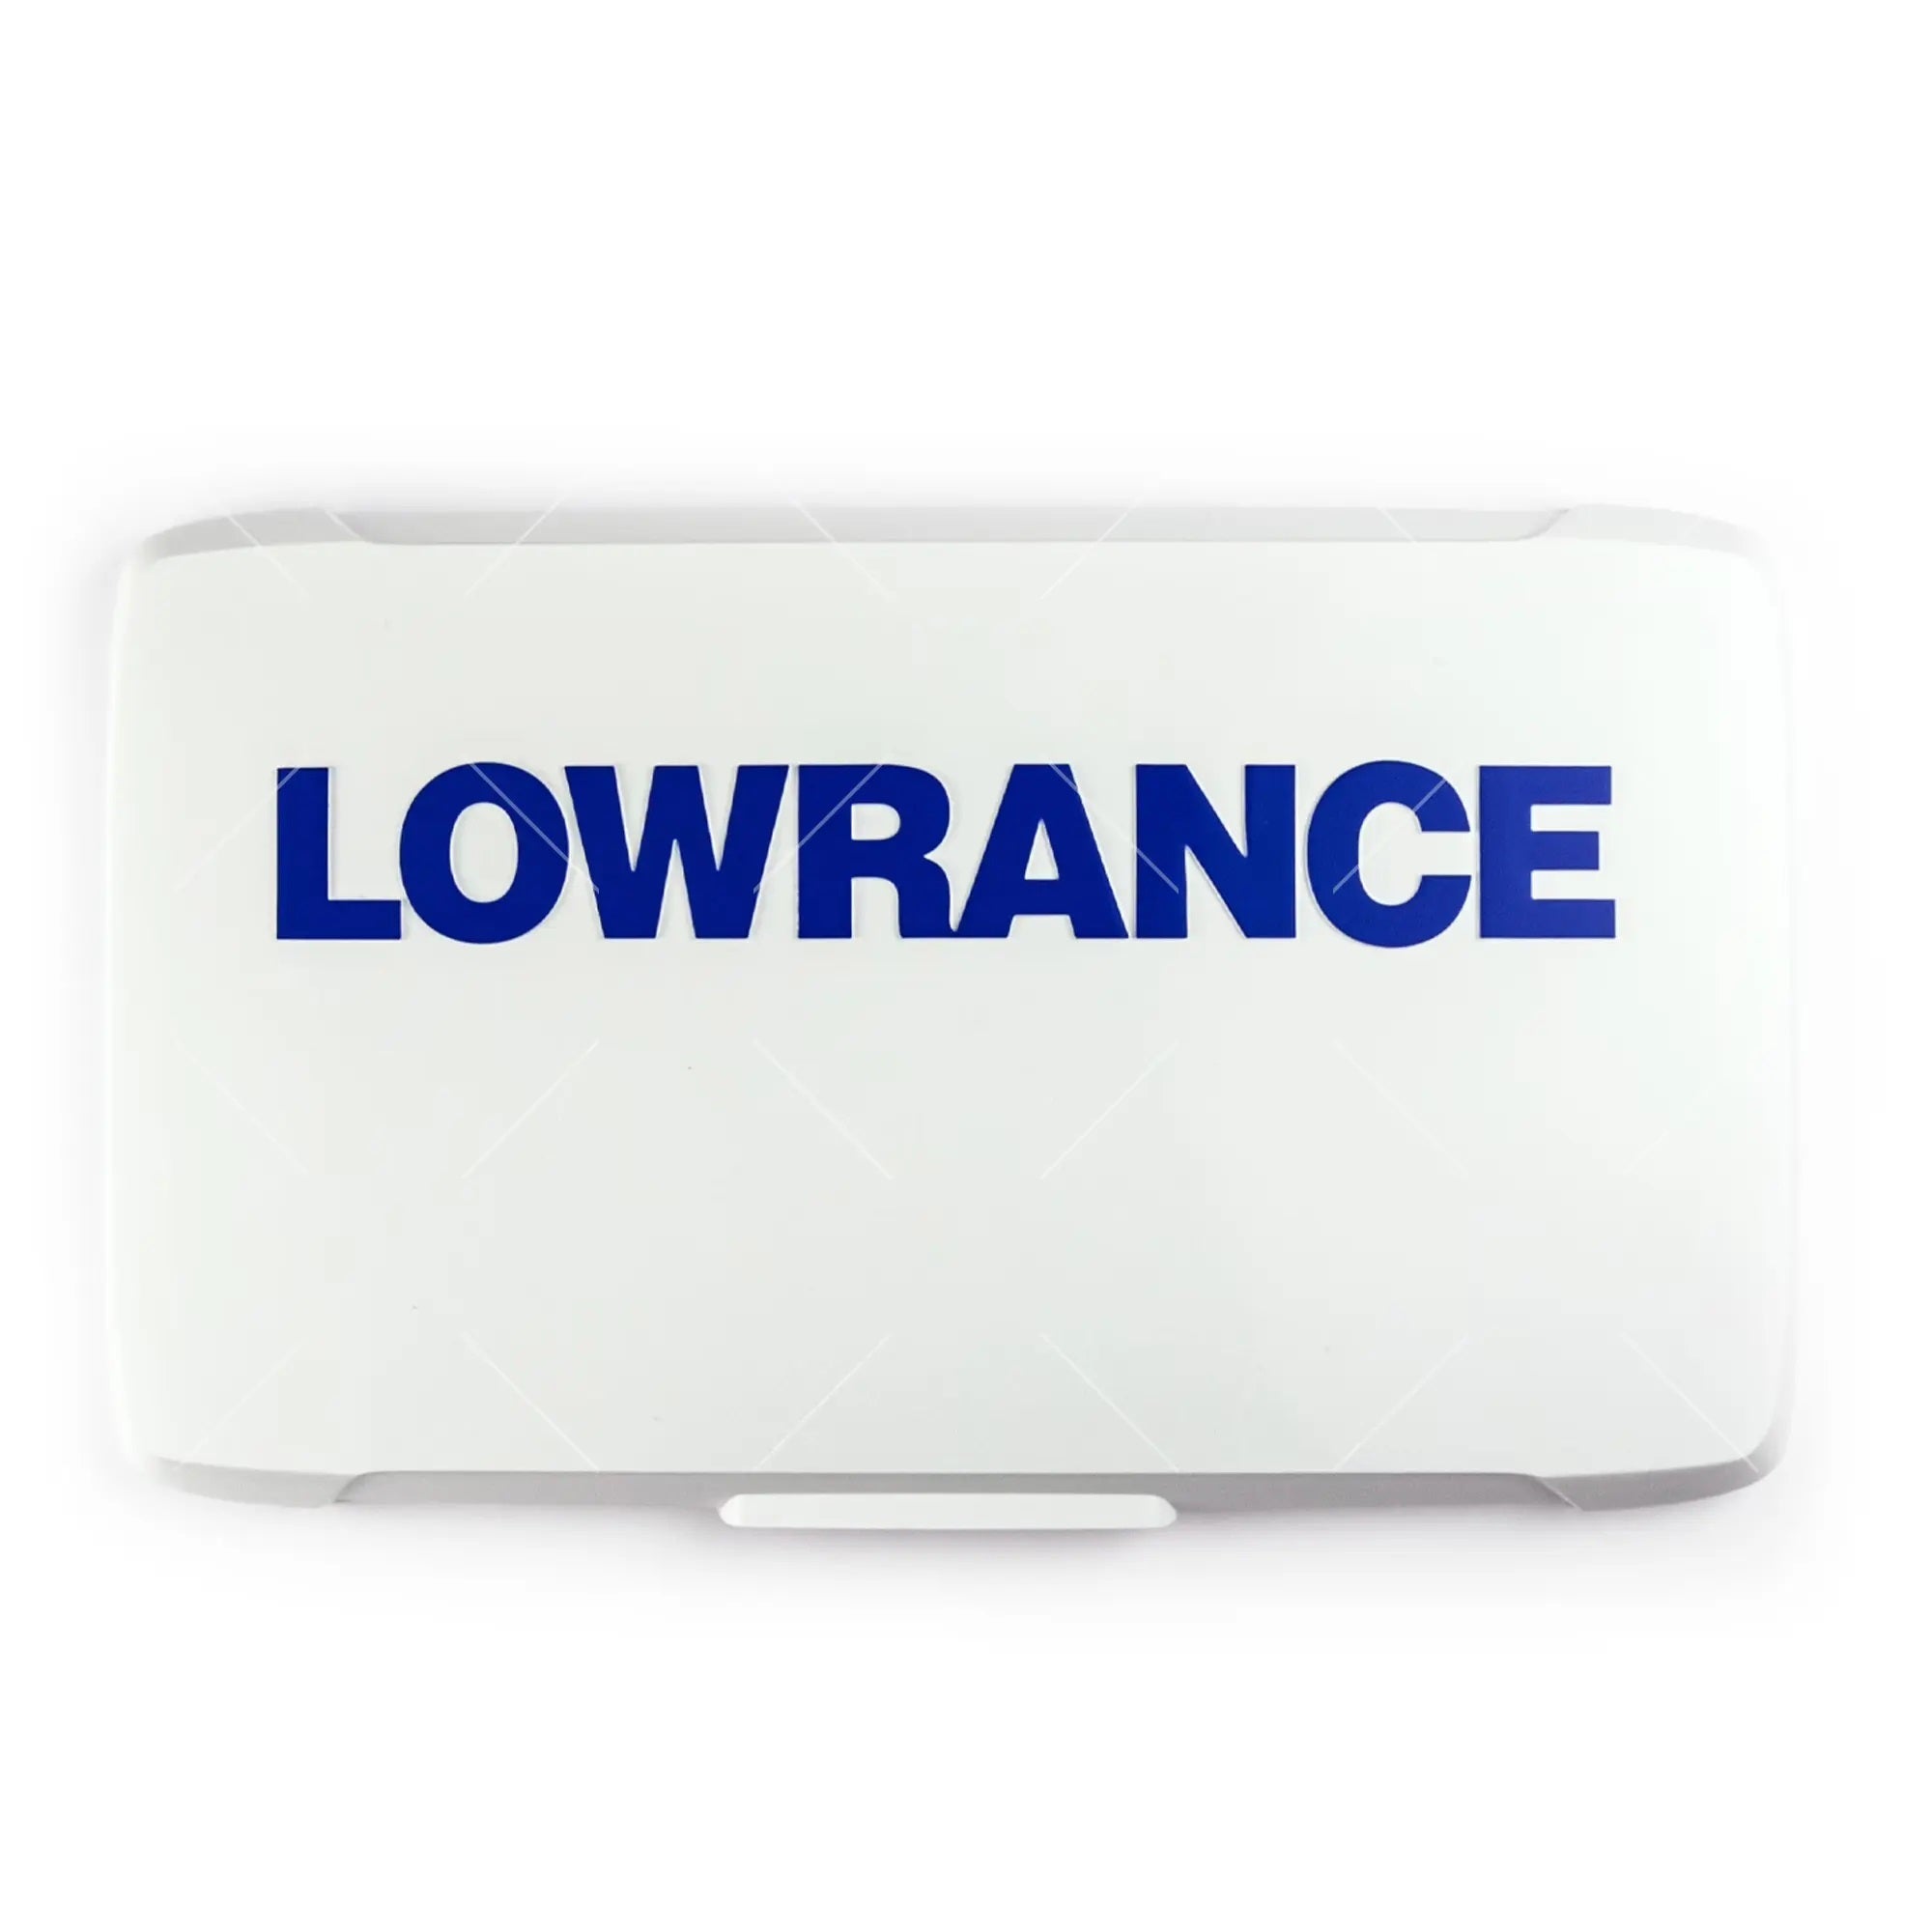 Lowrance 000-16250-001 Sun Cover for Eagle 7